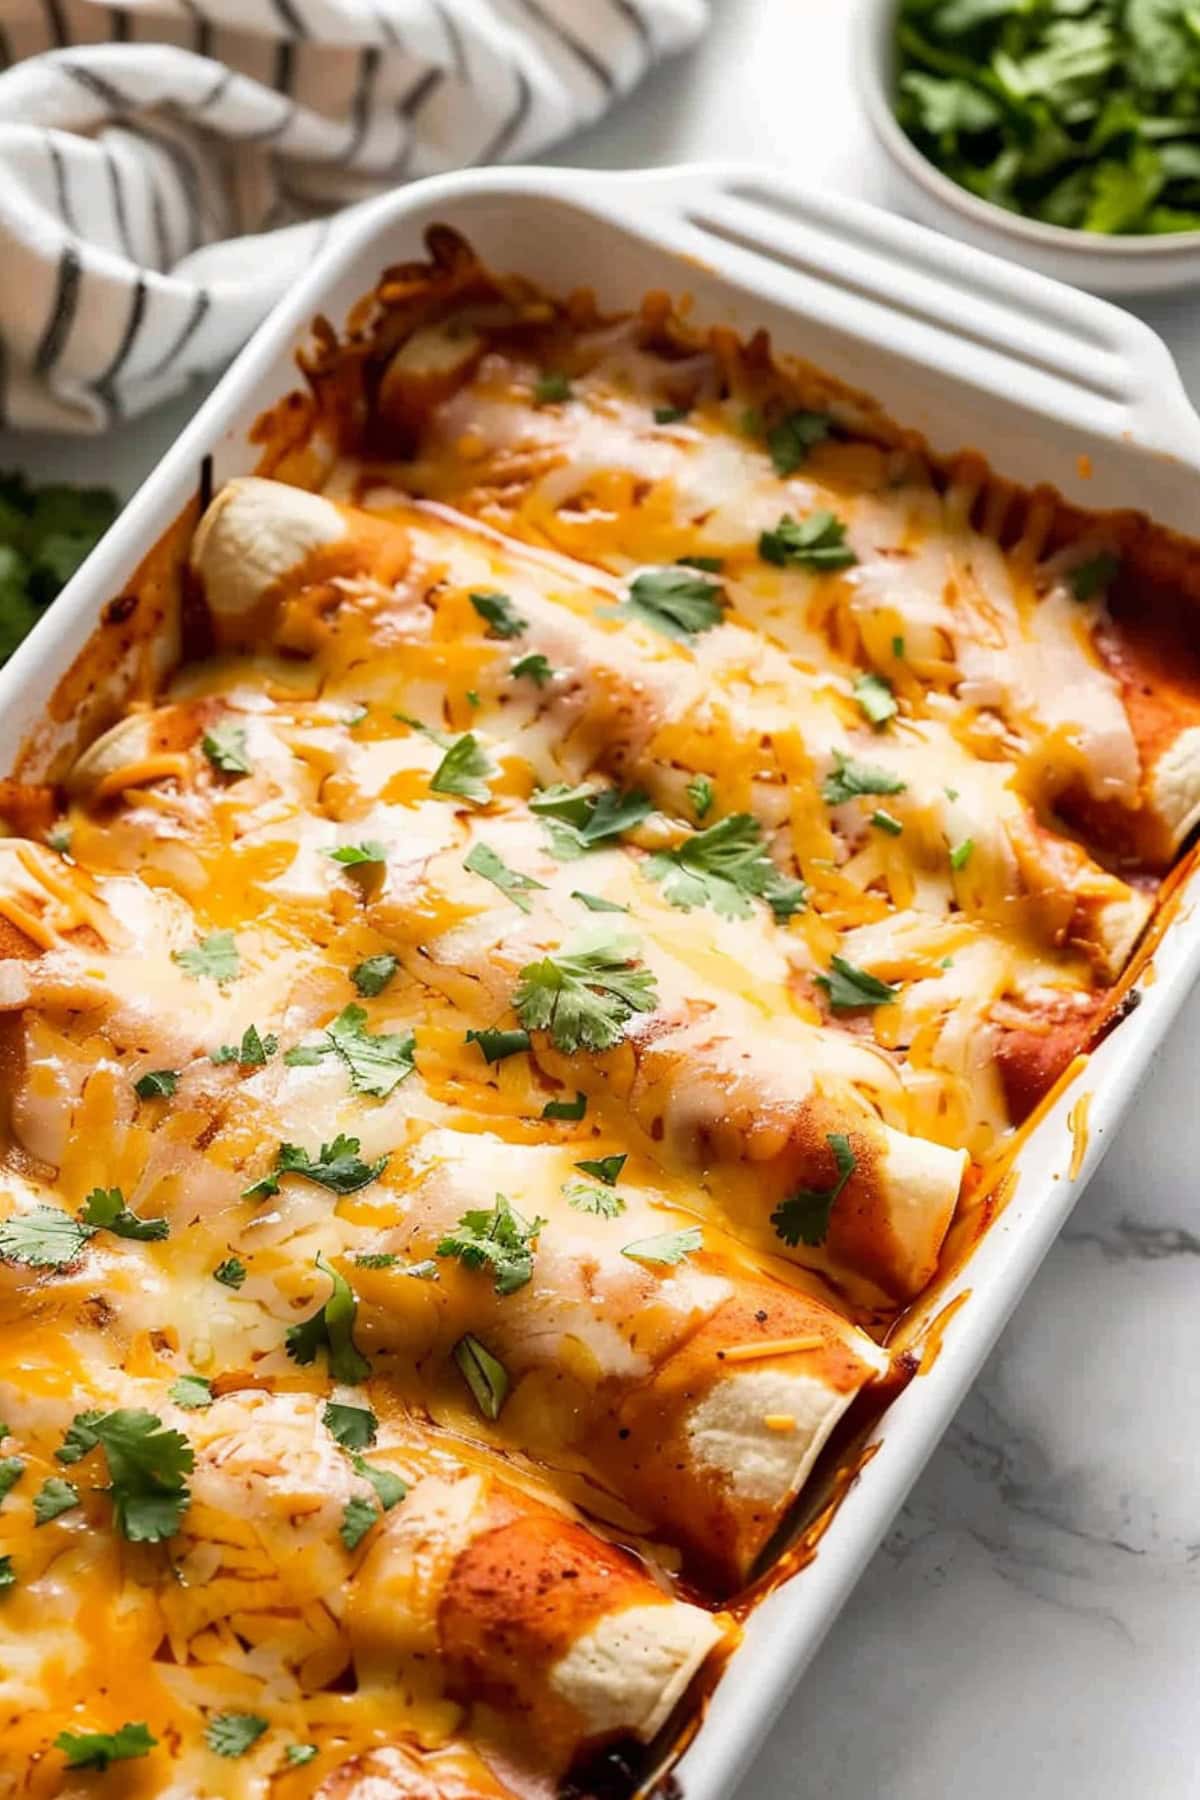 Chicken enchiladas topped with melted cheese and enchilada sauce.